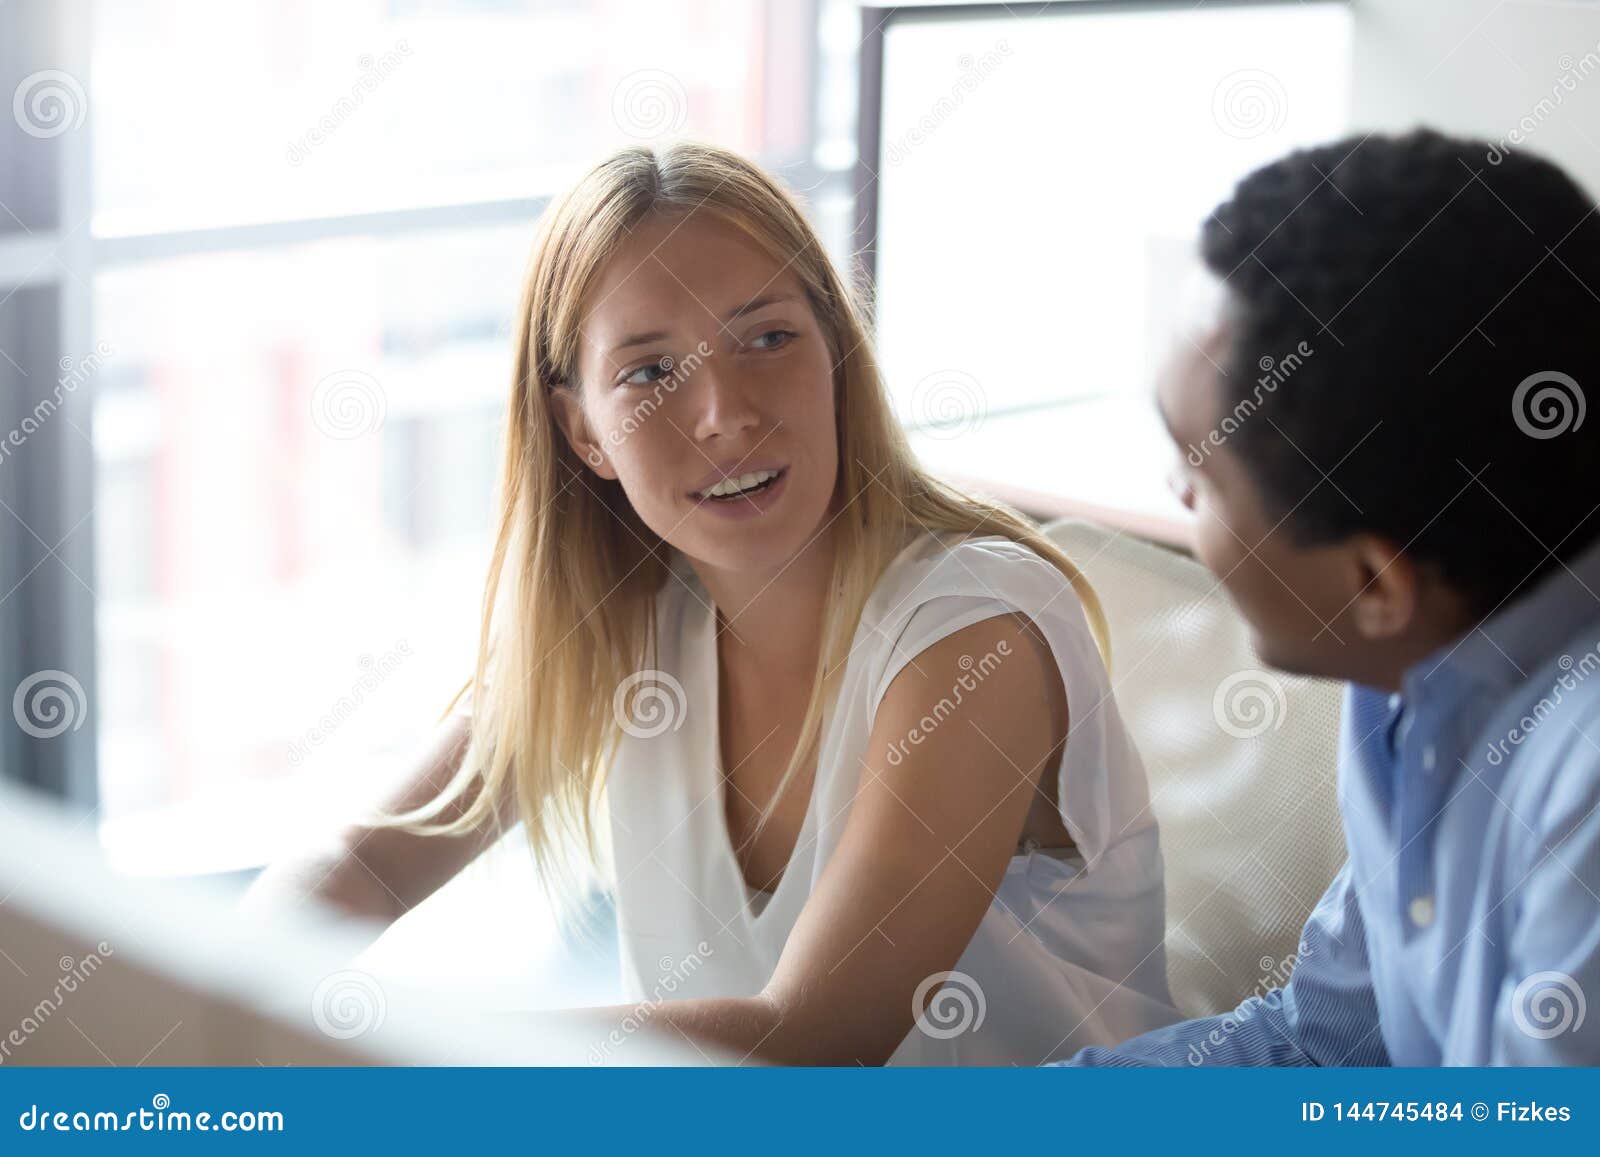 young caucasian businesswoman manager listening to african colleague having discussion